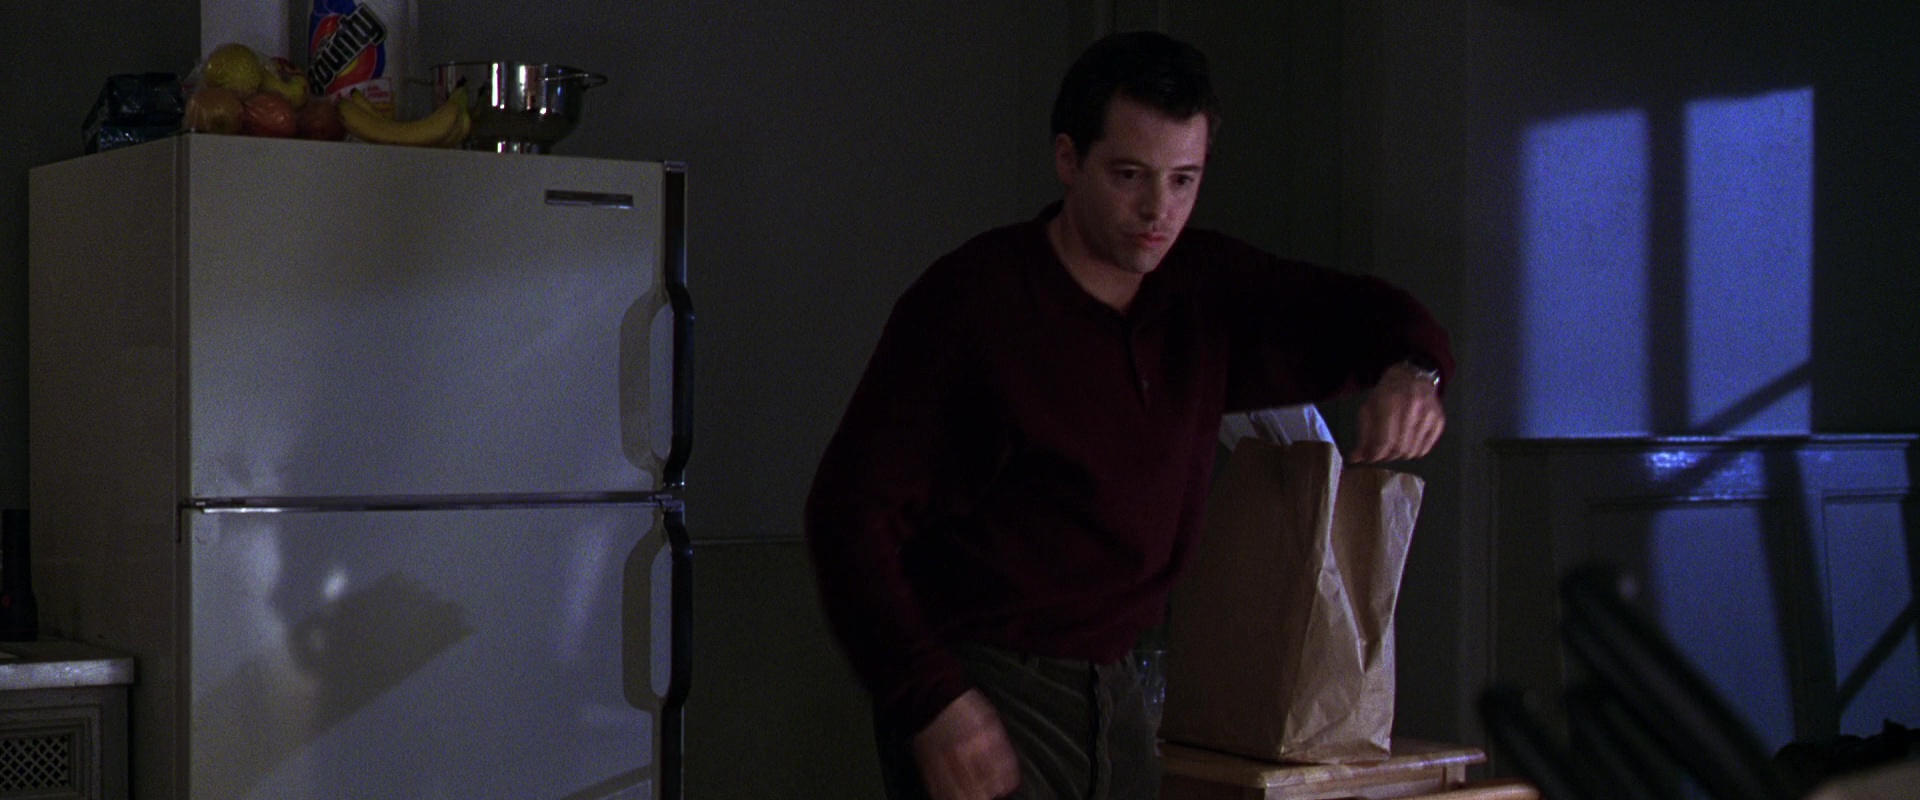 Bounty Paper Towels Used by Matthew Broderick in The Cable Guy (1996) Movie1920 x 800